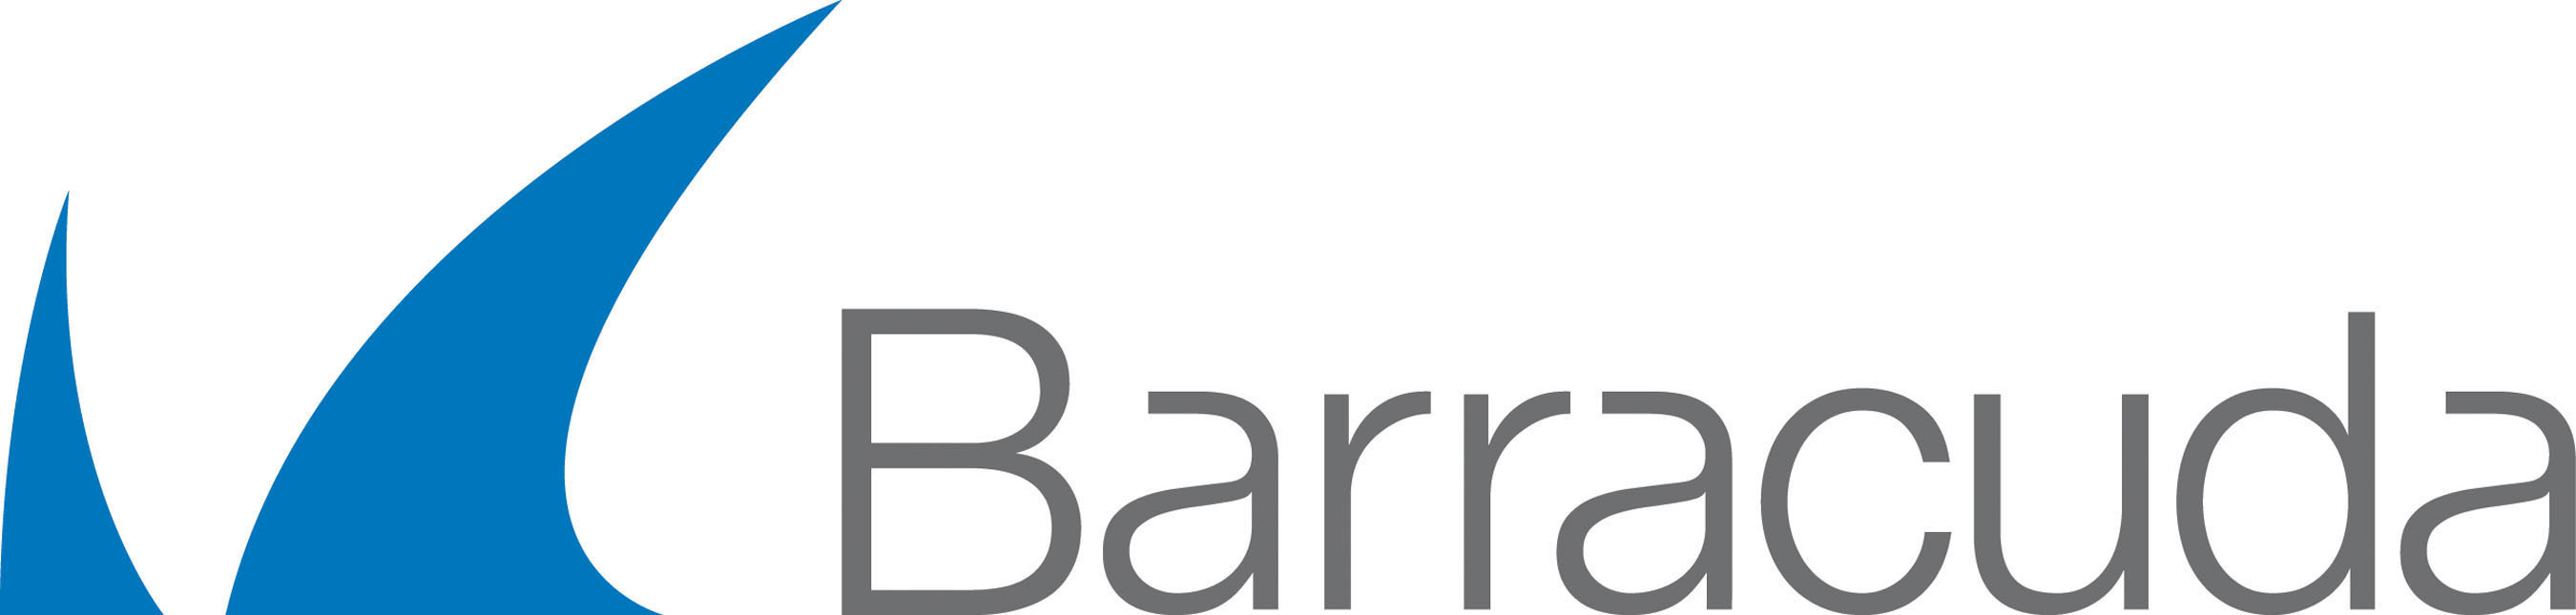 Barracuda Active DDoS Prevention - Subscription License - 1 License - 1 Month